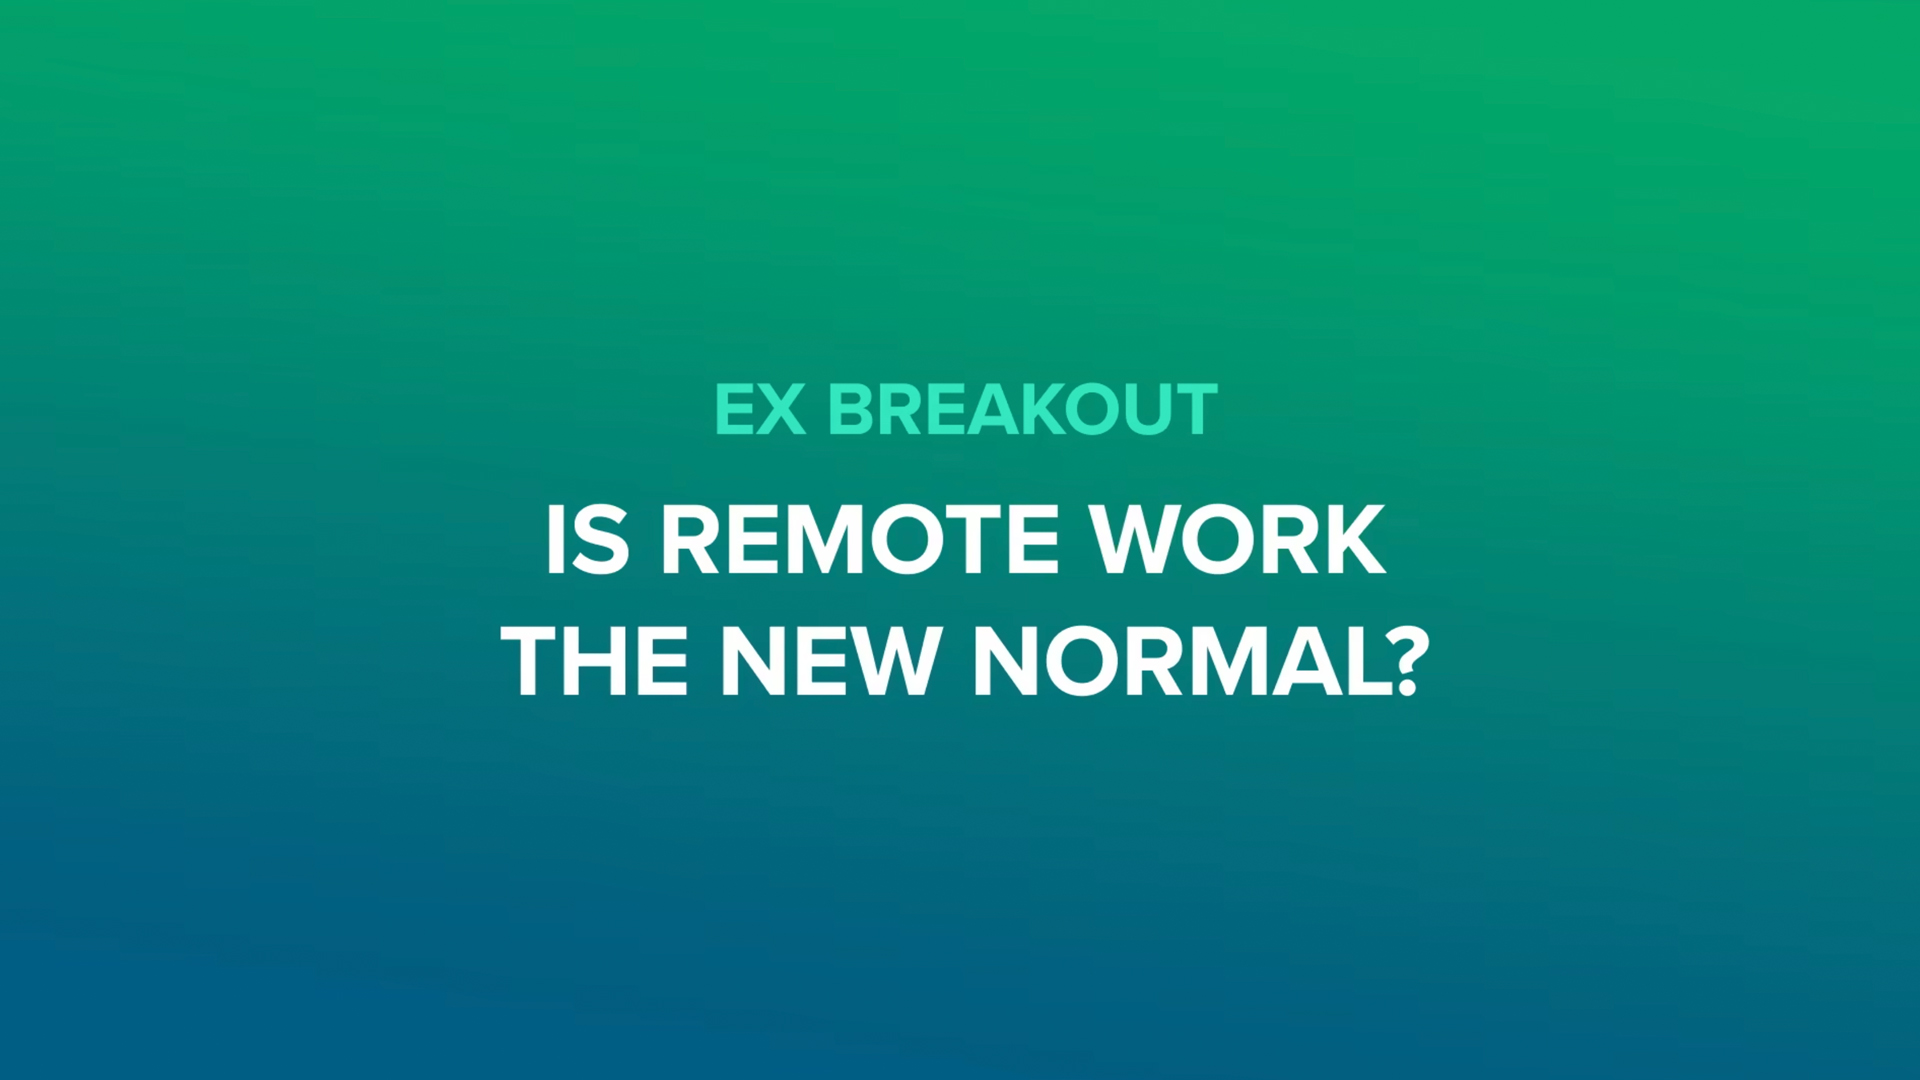 EX Breakout - Is Remote Work the New Normal?